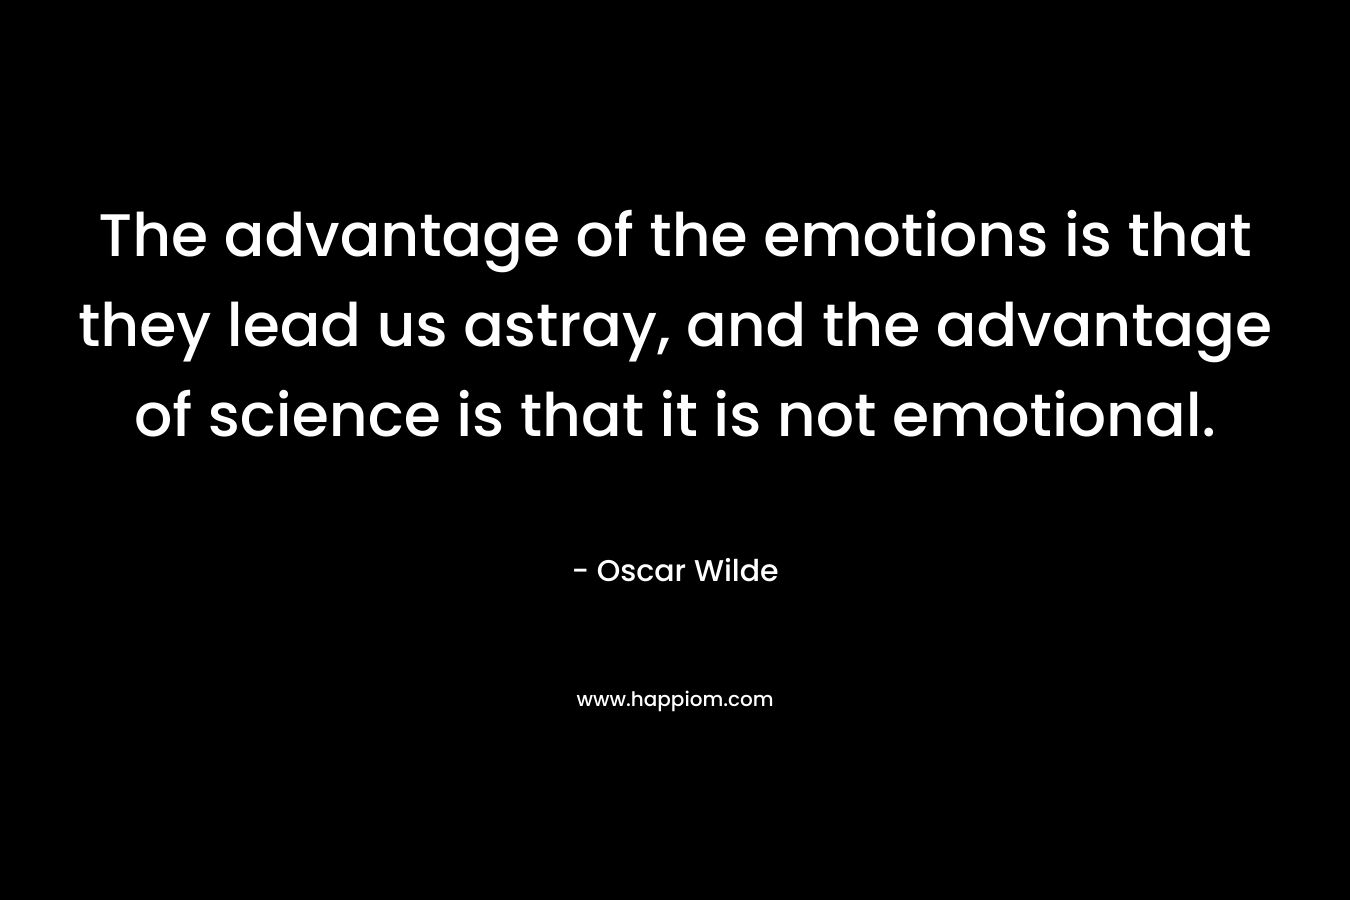 The advantage of the emotions is that they lead us astray, and the advantage of science is that it is not emotional.